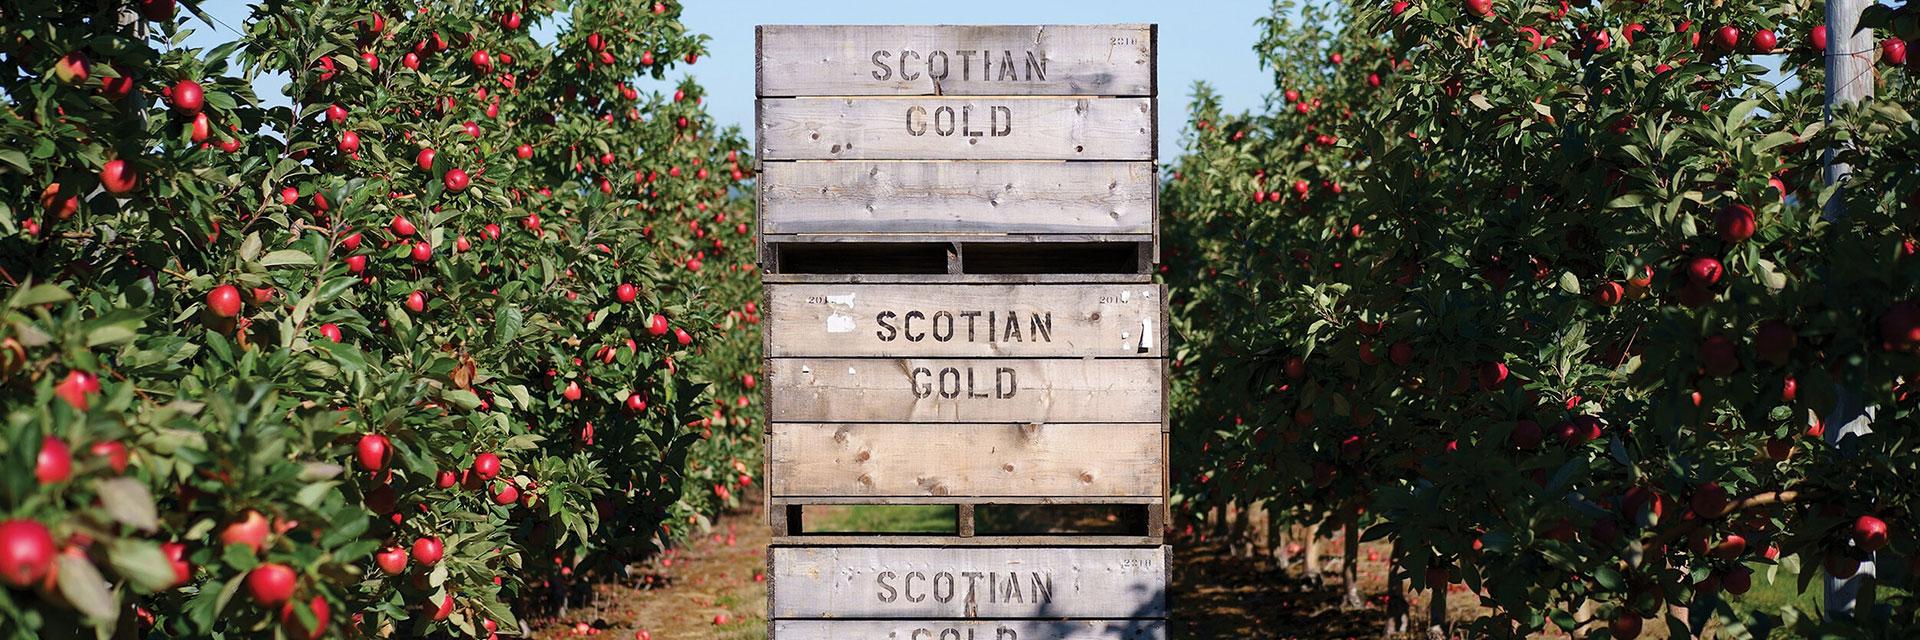 Boxes with Scotian Gold printed on them sit stacked in an apple orchard.